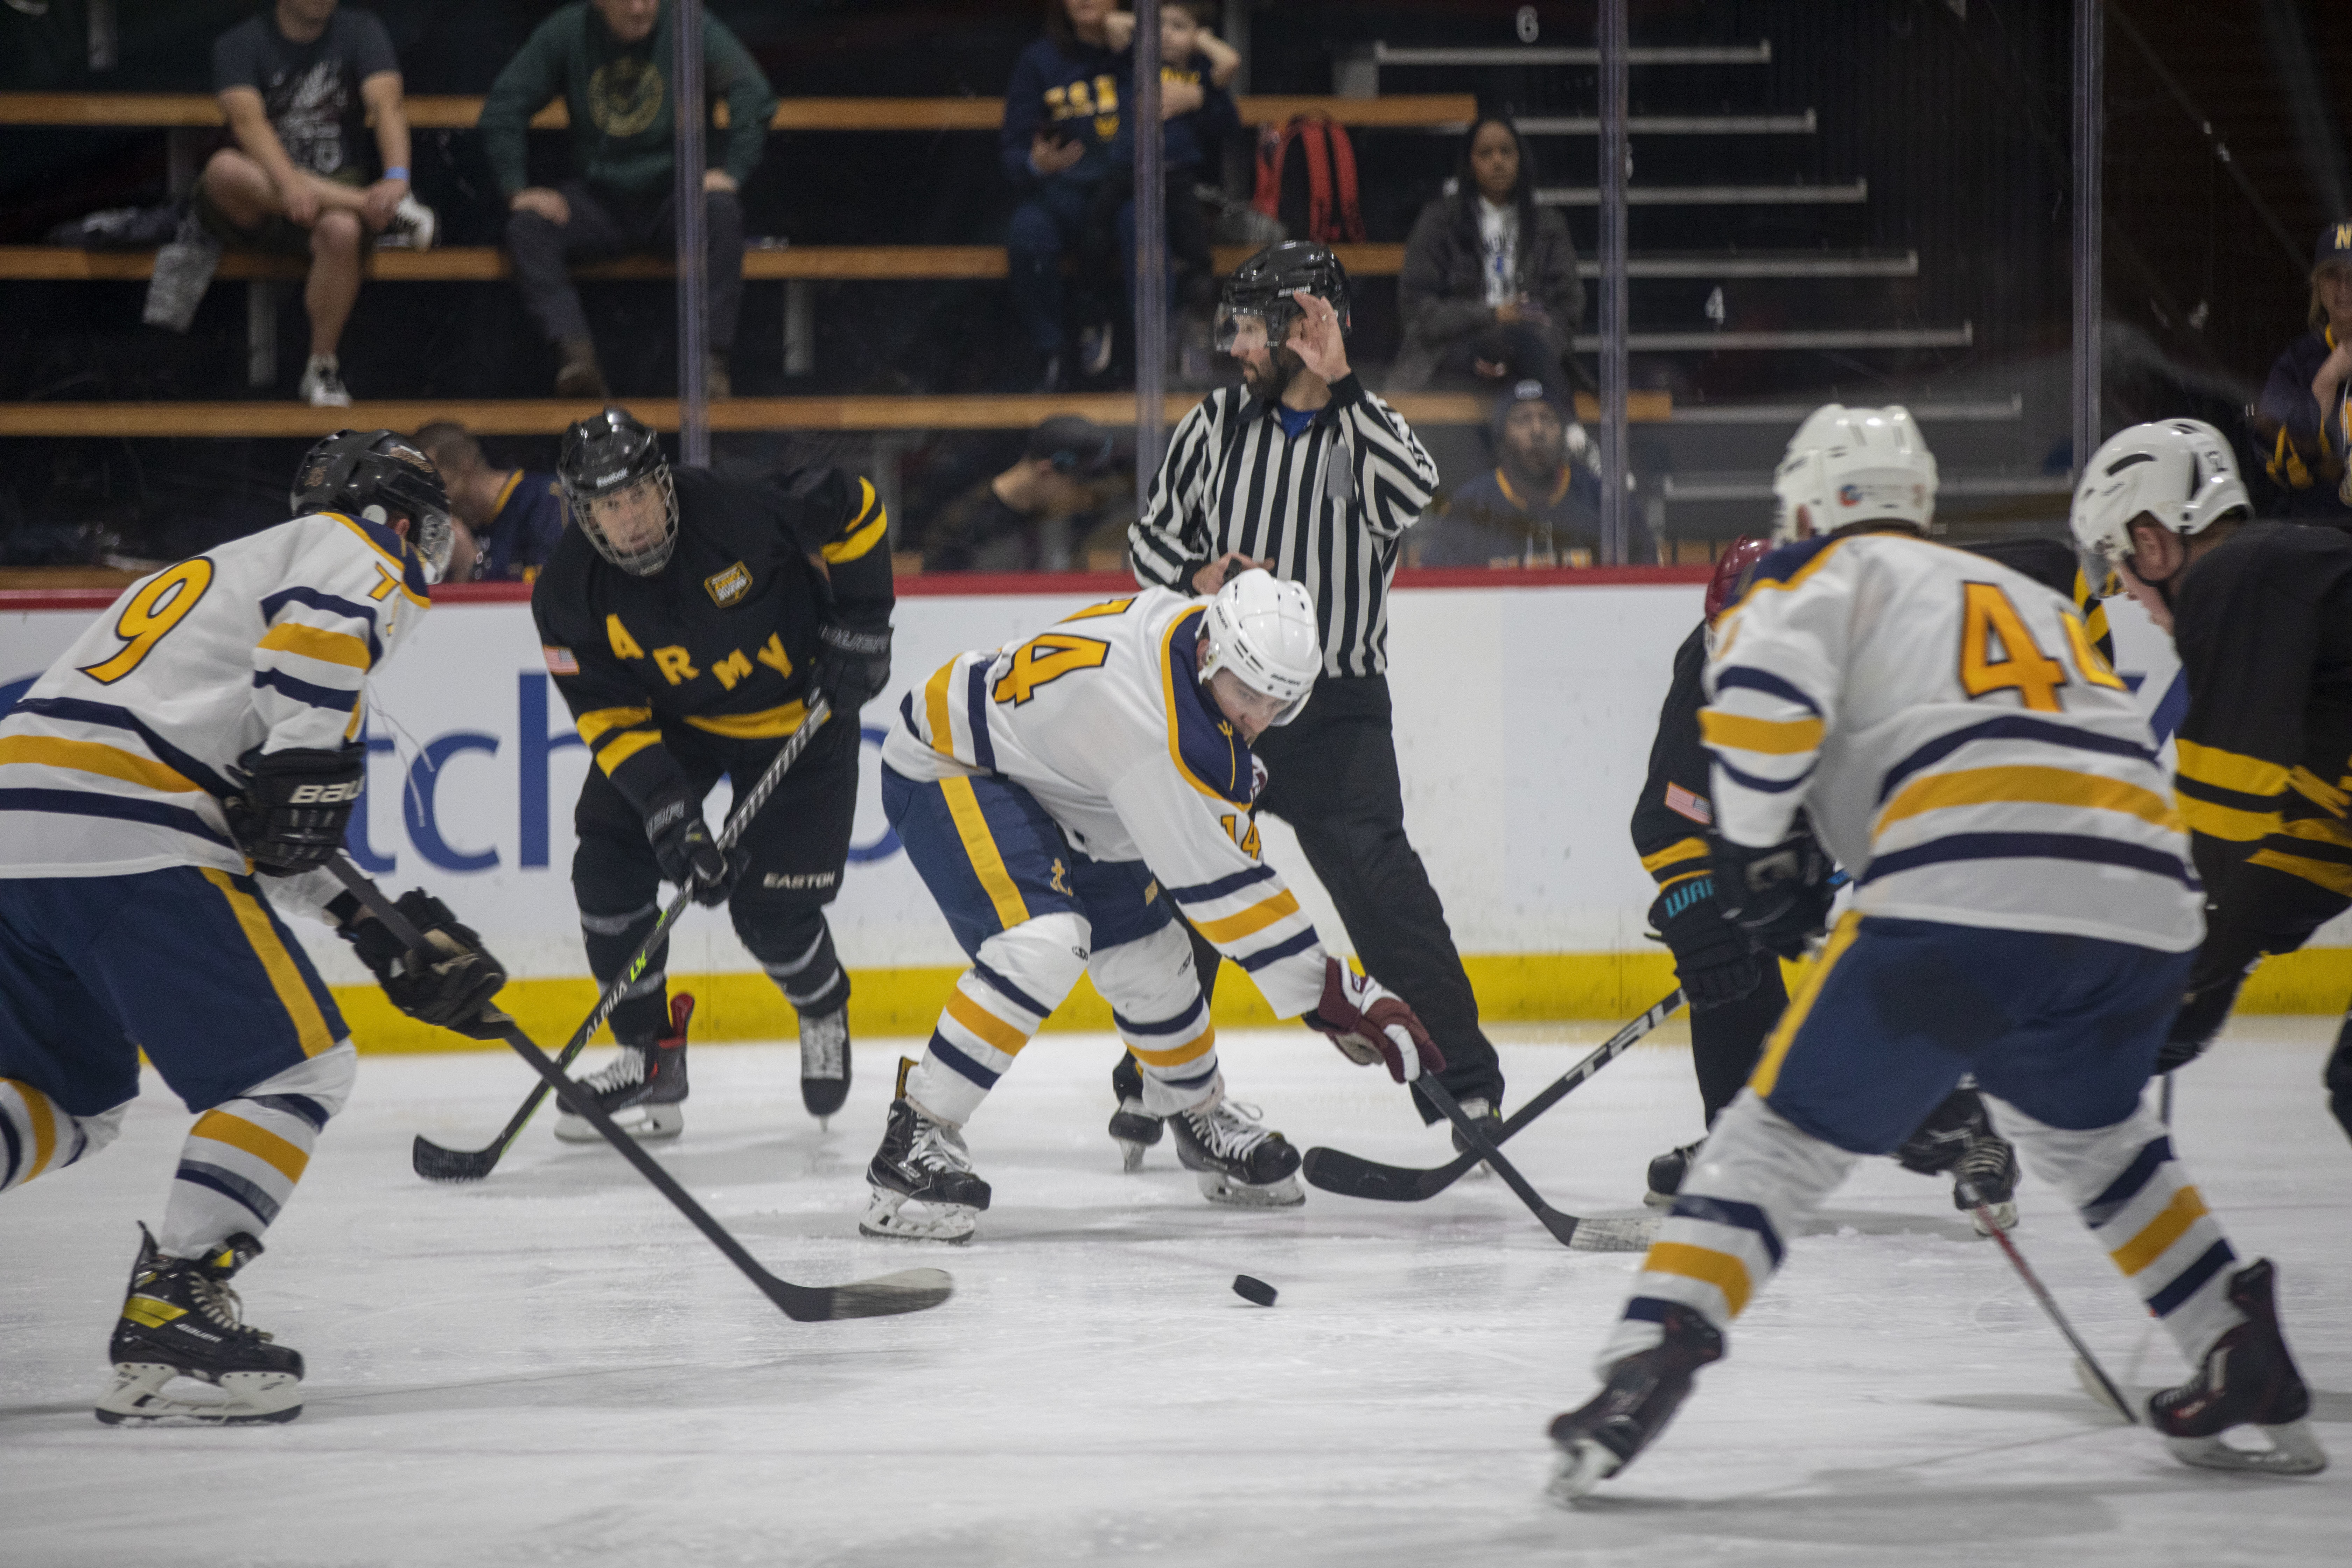 U.S. service members stationed around the Pacific Northwest play hockey in the 6th inaugural Army versus Navy hockey game at the Kraken Community Iceplex in Seattle, Washington, Sept. 25, 2022.